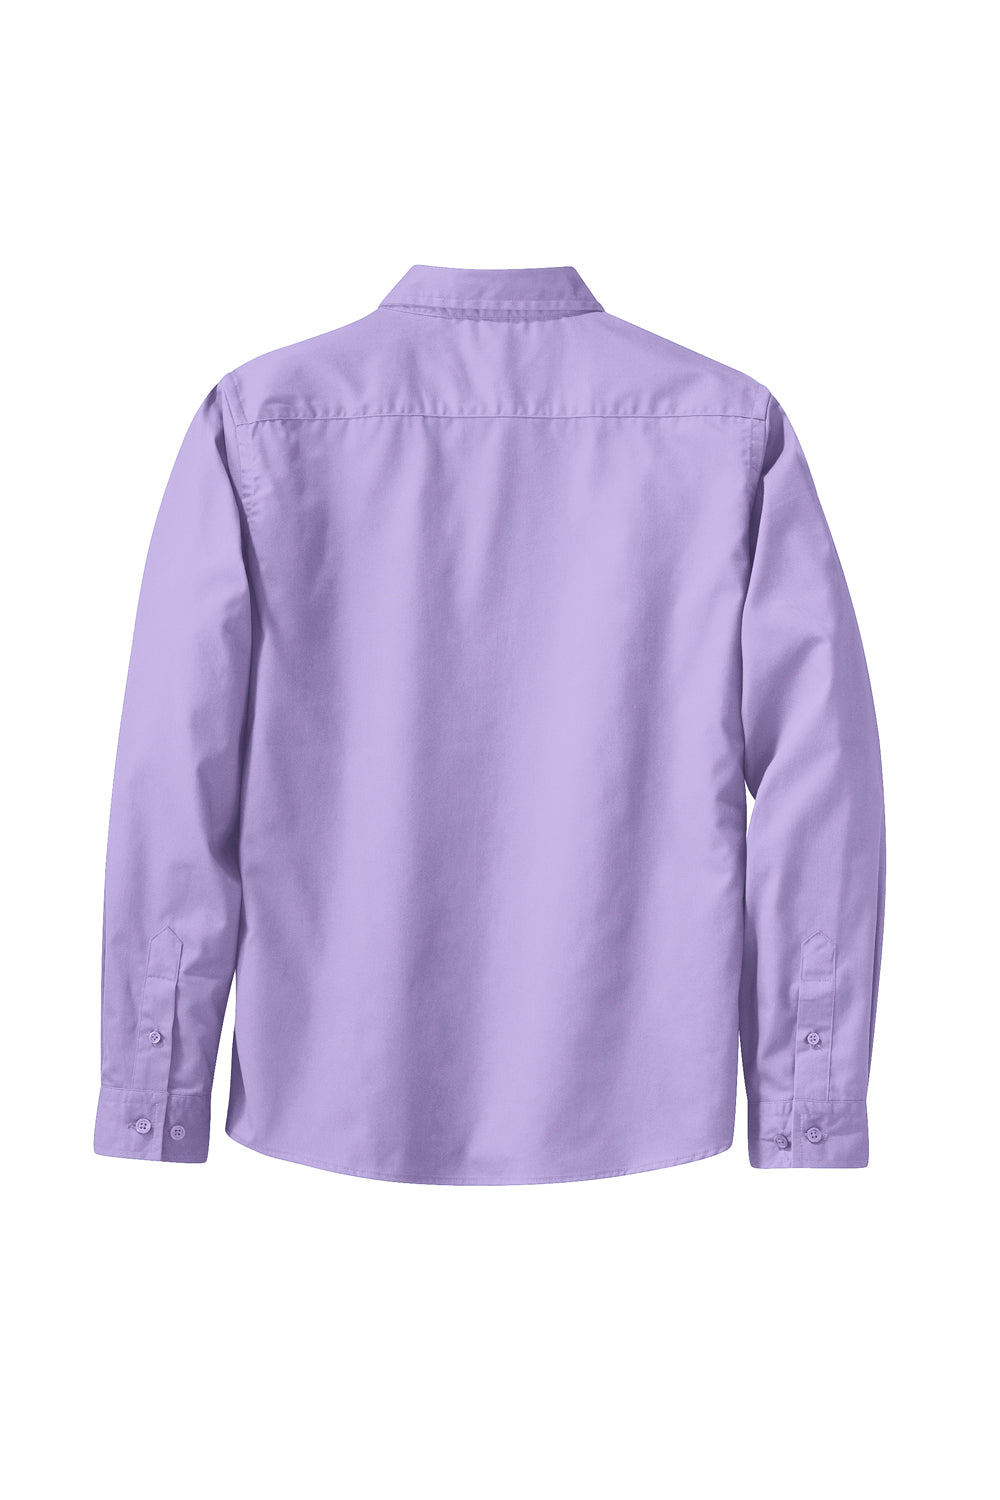 Port Authority L608 Womens Easy Care Wrinkle Resistant Long Sleeve Button Down Shirt Bright Lavender Purple Flat Back